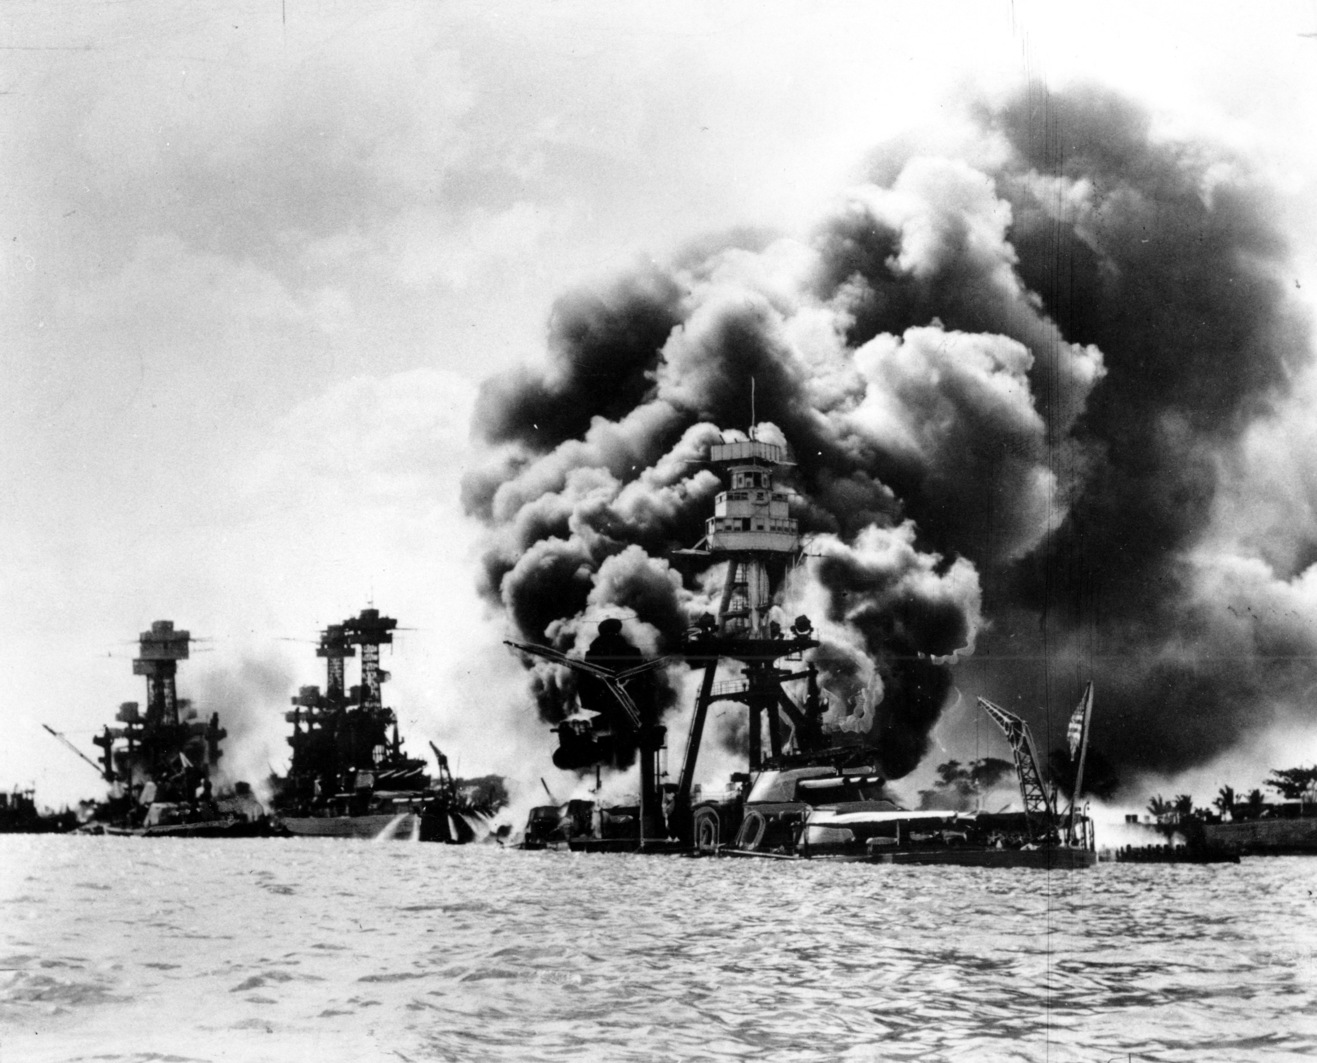 Three U.S. battleships are hit from the air during the Japanese attack on Pearl Harbor on Dec. 7, 1941. Japan's bombing of U.S. military bases at Pearl Harbor brings the U.S. into World War II. From left are: USS West Virginia, severely damaged; USS Tennessee, damaged; and USS Arizona, sunk. (AP Photo)